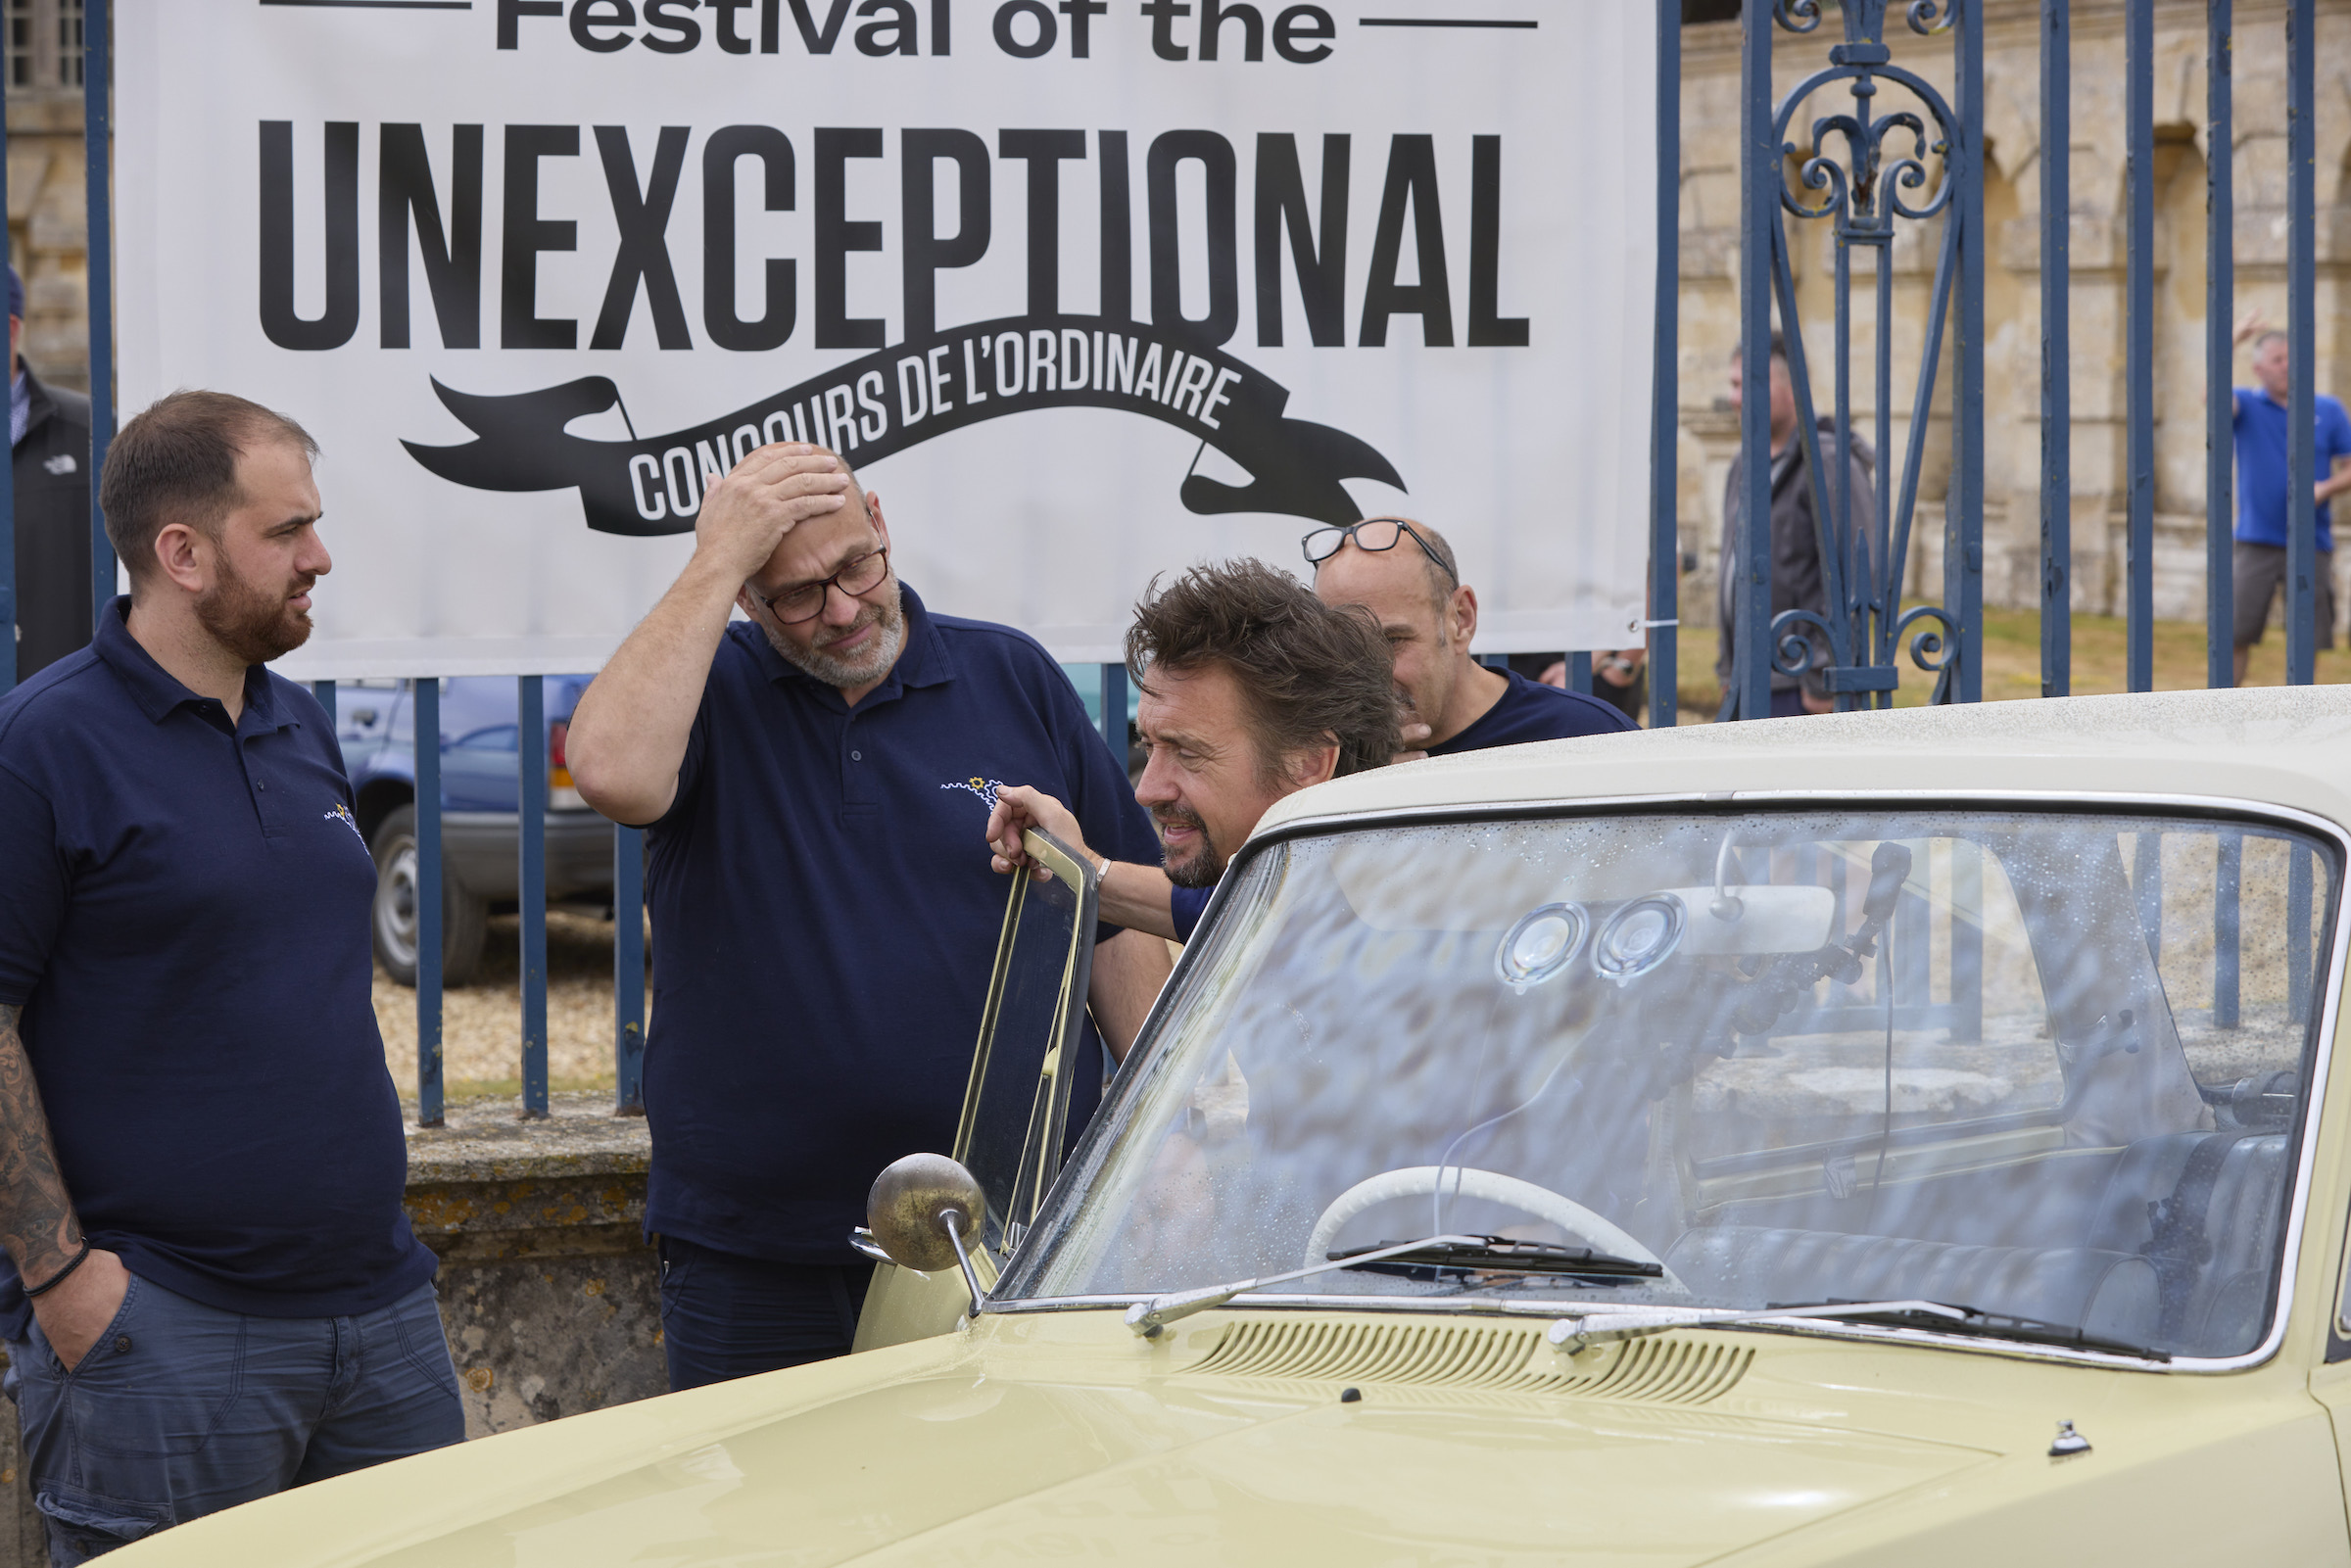 Richard Hammond at The Hagerty Festival of the Unexceptional